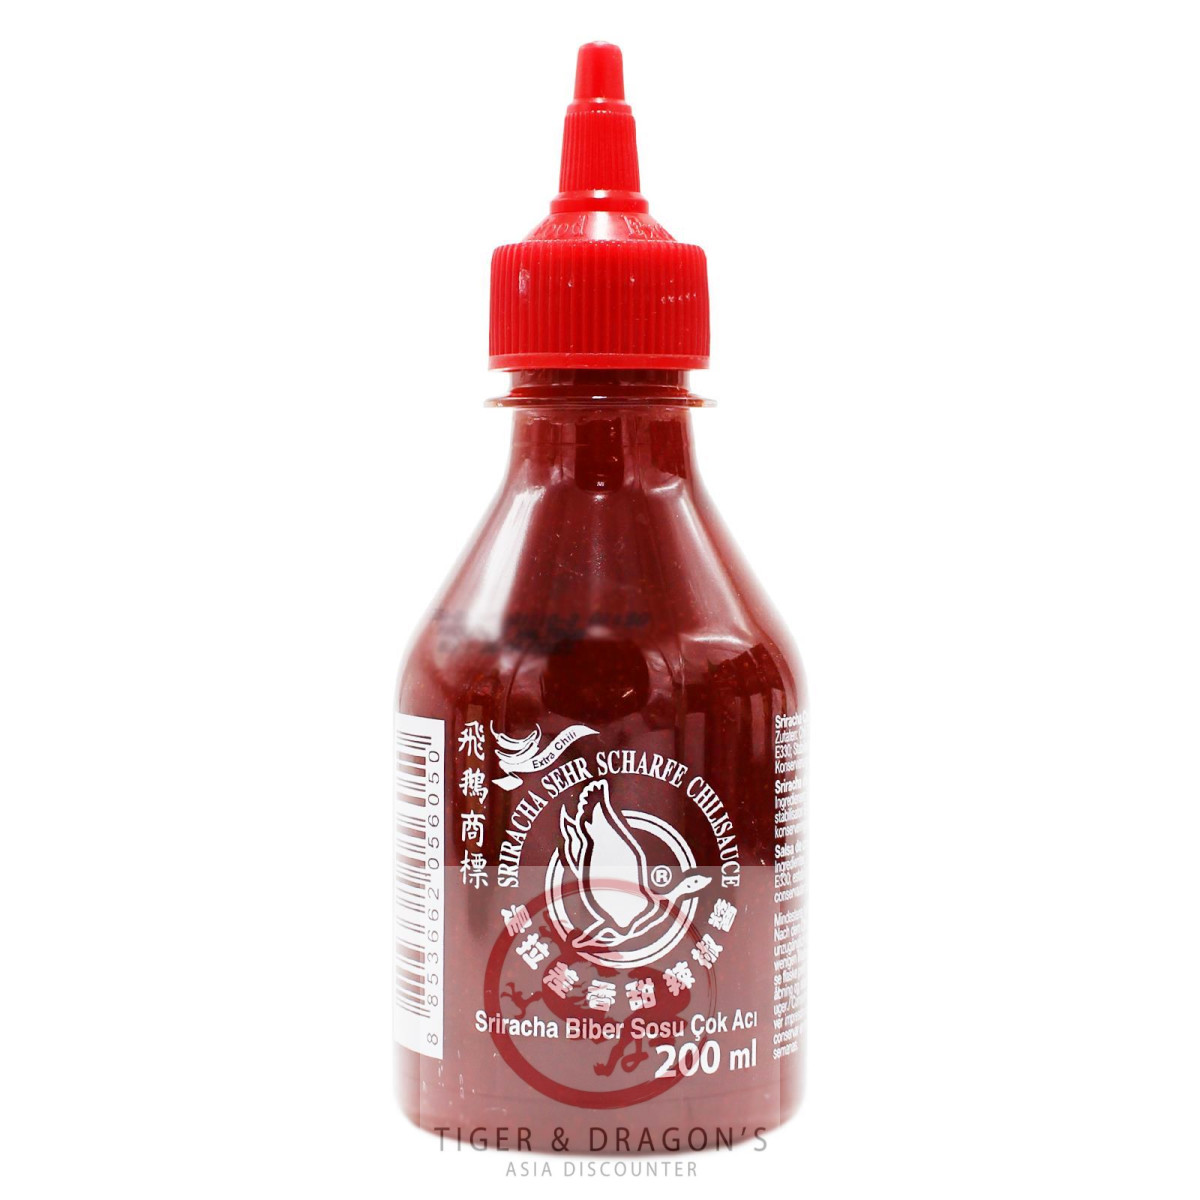 Flying Goose Sriracha Chilisauce sehr scharf 200ml (roter...